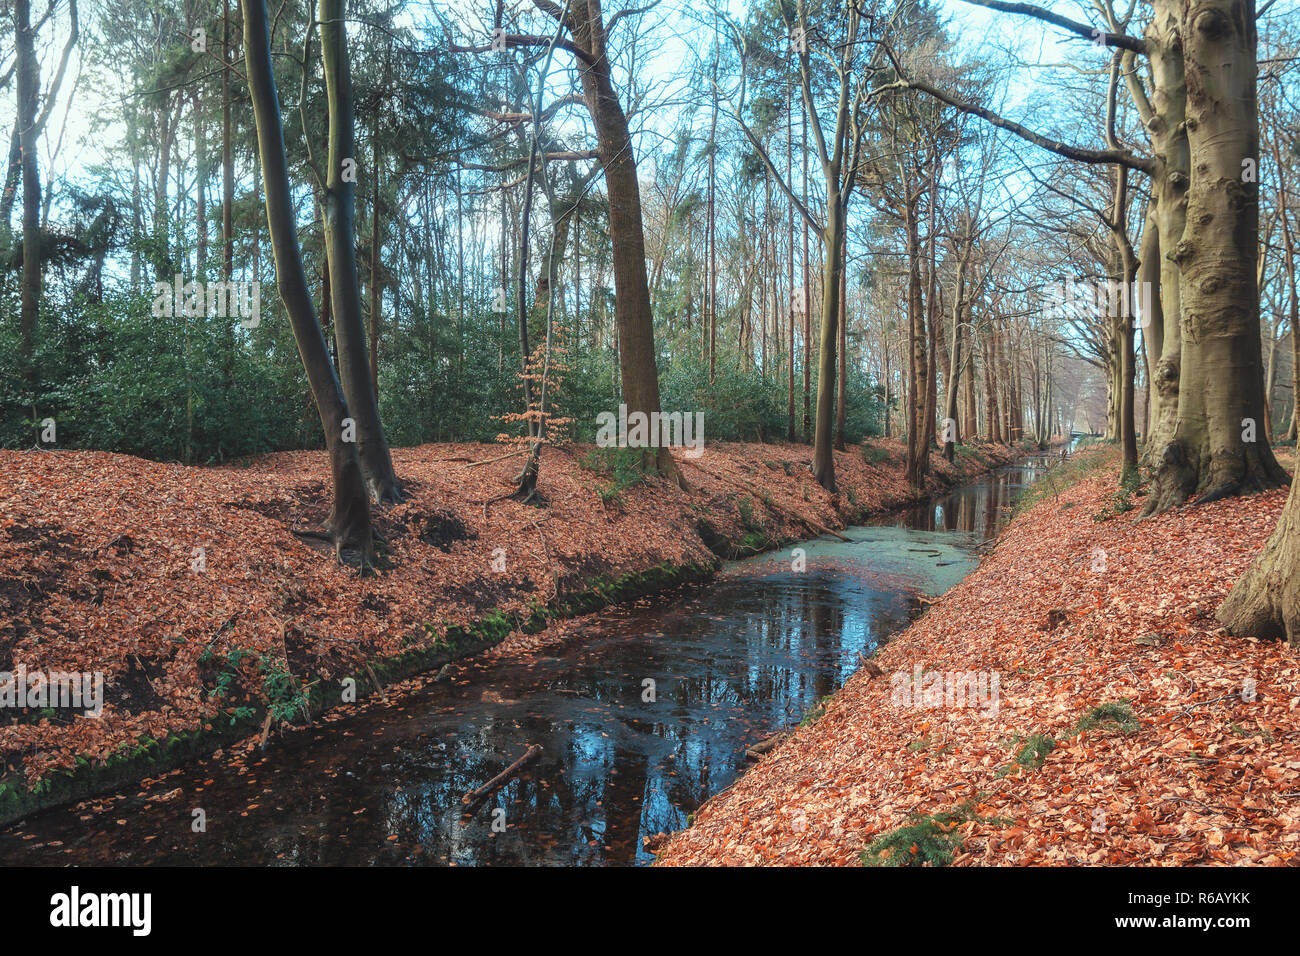 The beautiful park of the estate Gooilust in 's-Graveland in The Netherlands Stock Photo